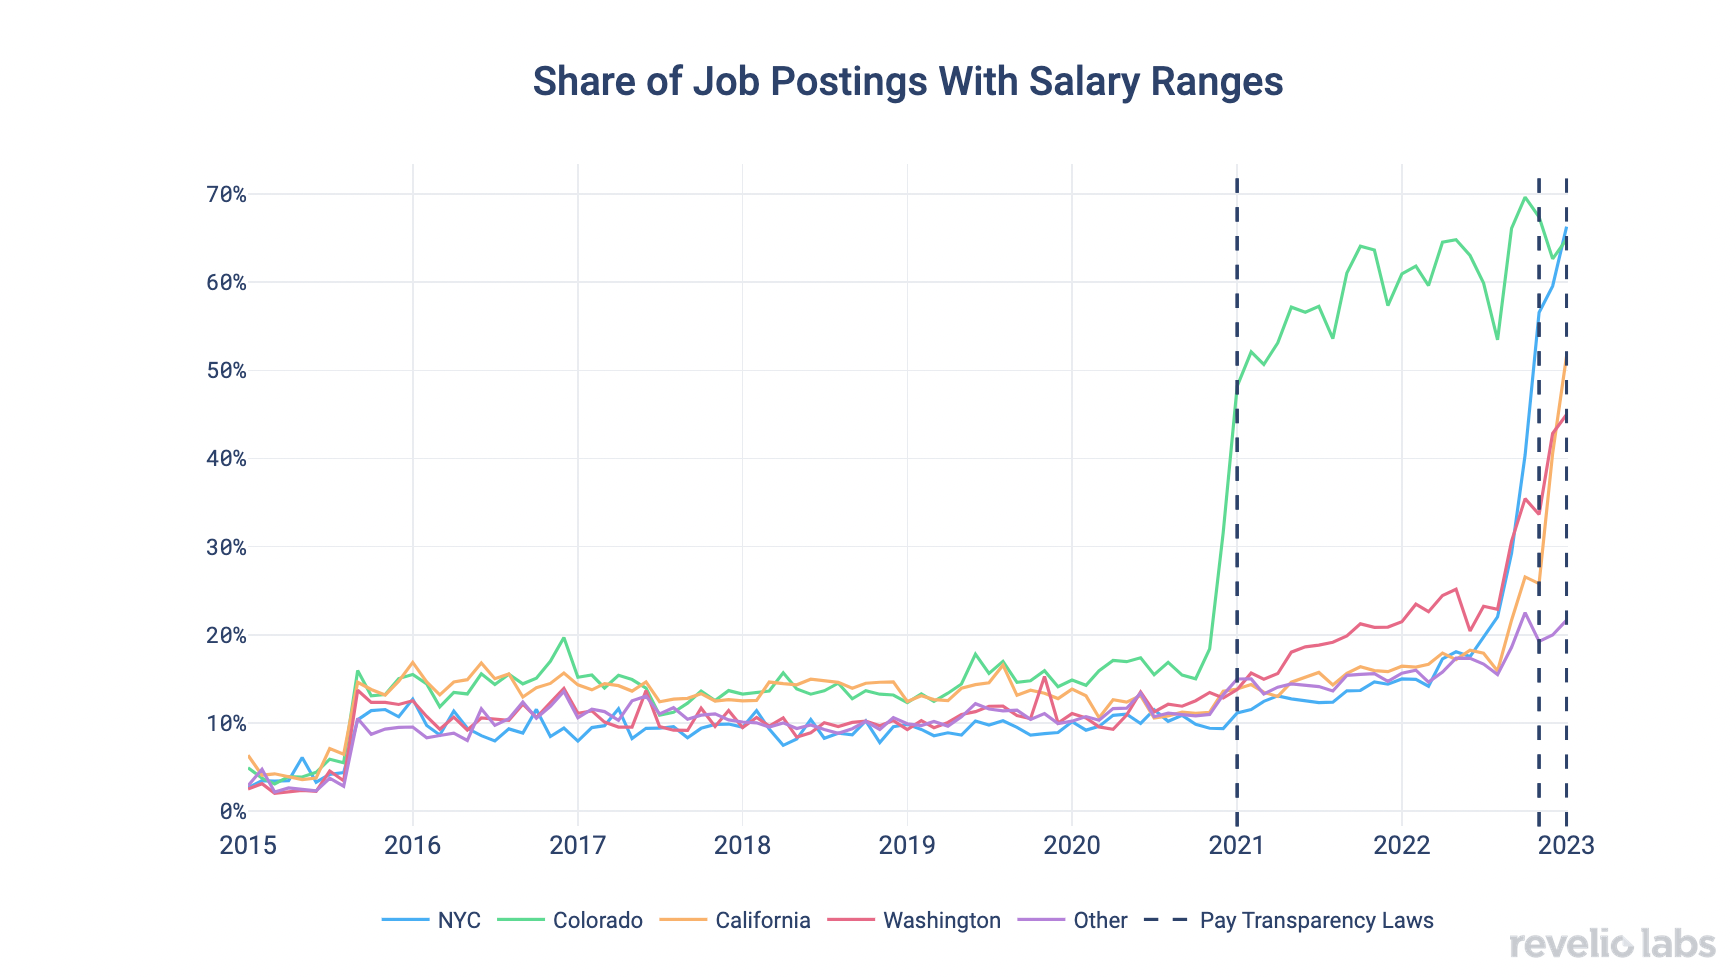 Share of postings with ranges